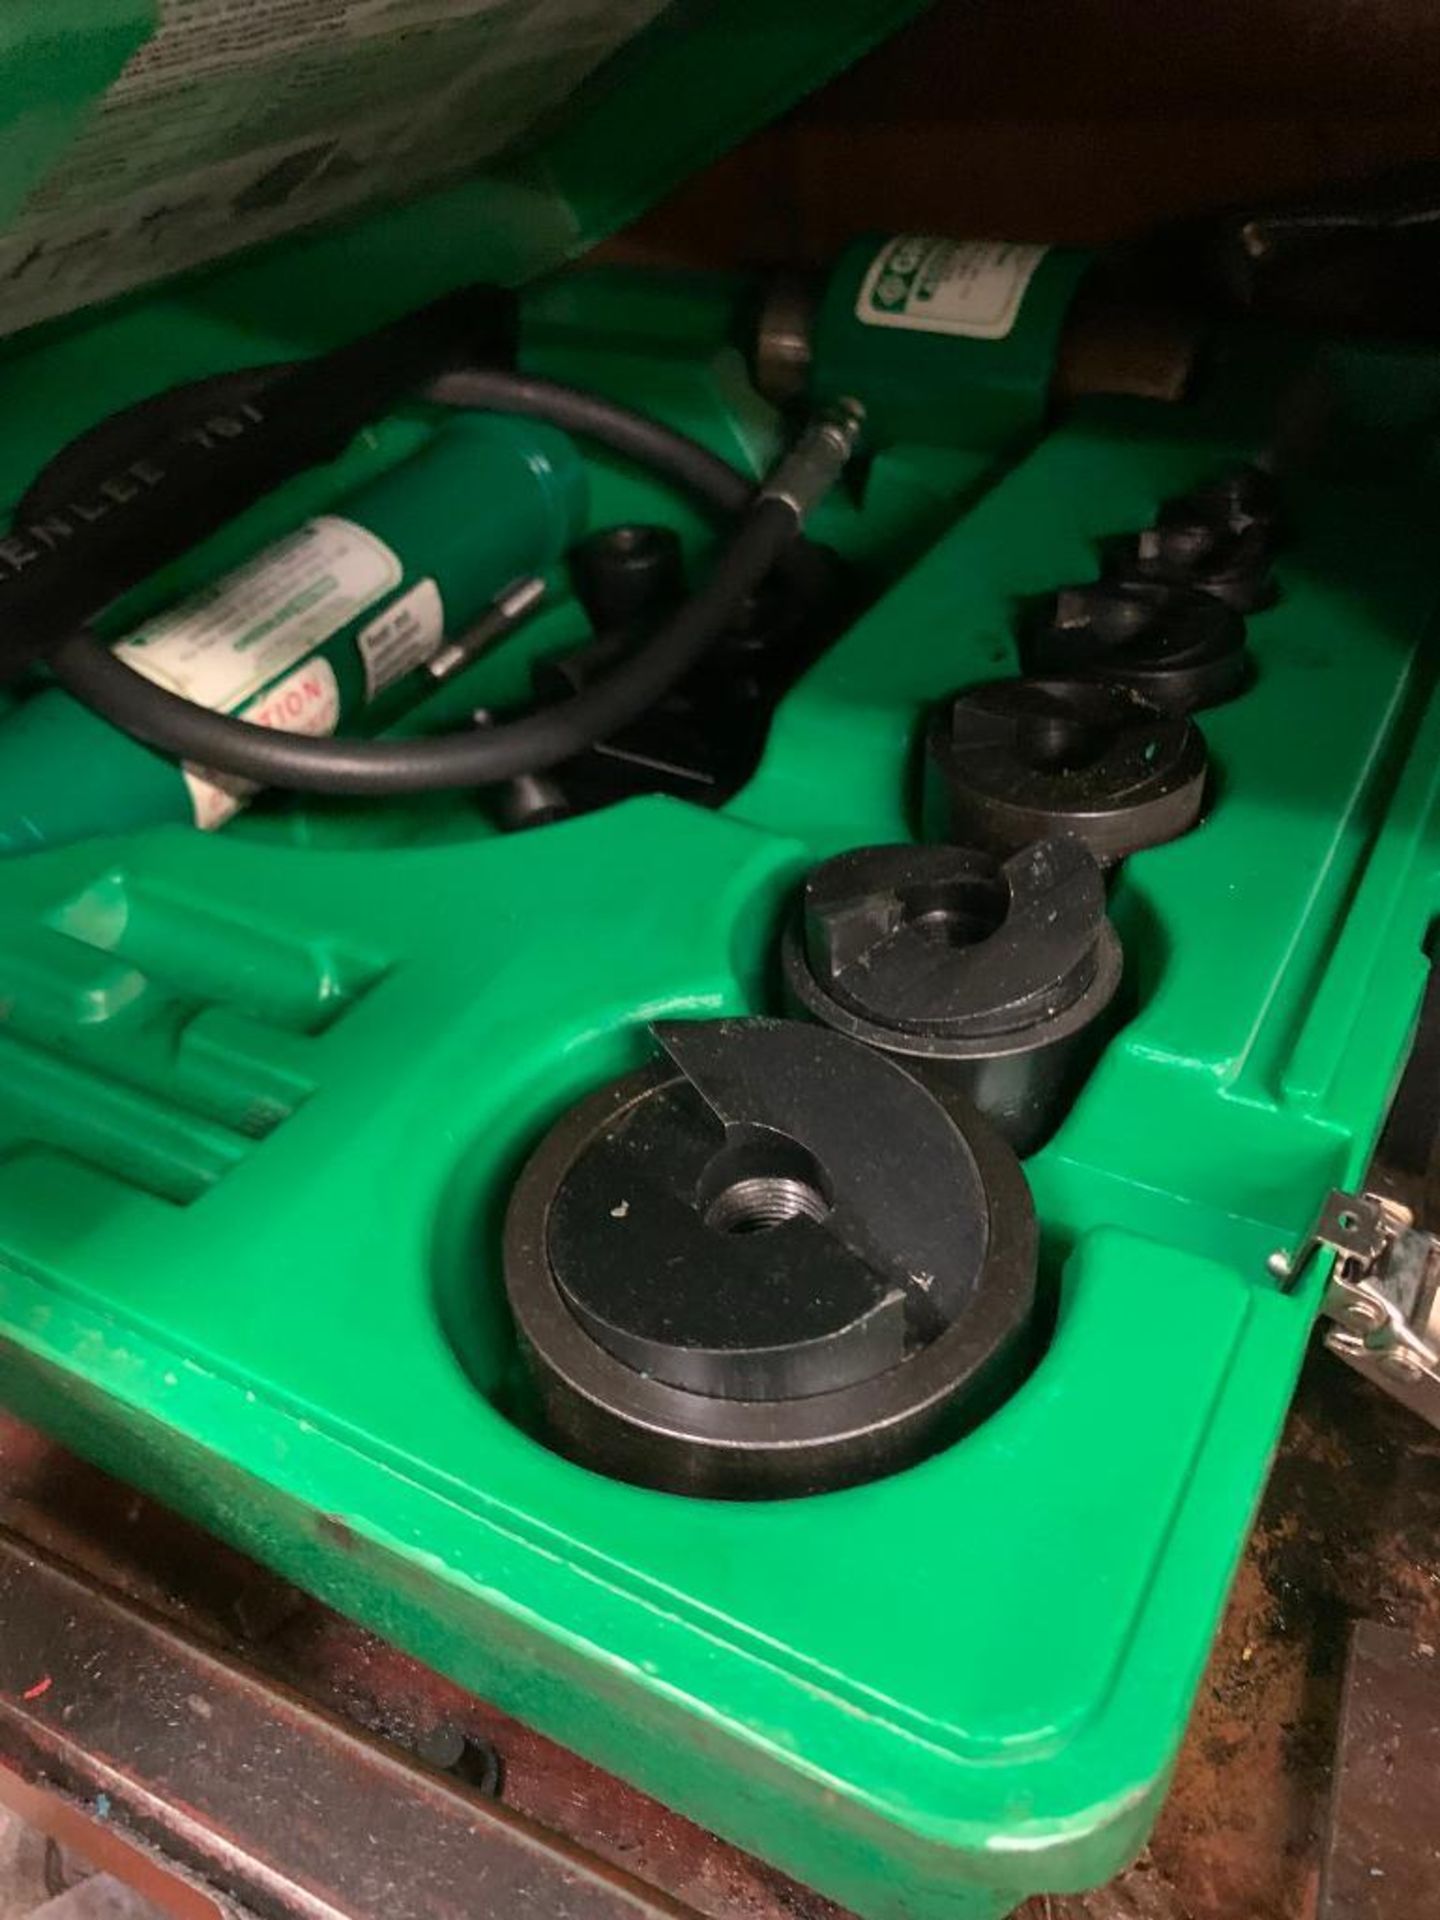 Knaack Gang Box w/ Enerpac Hydraulic Hand Pump & Jack, Greenlee Knock-Out Punch Set, Assorted Tools - Image 7 of 8